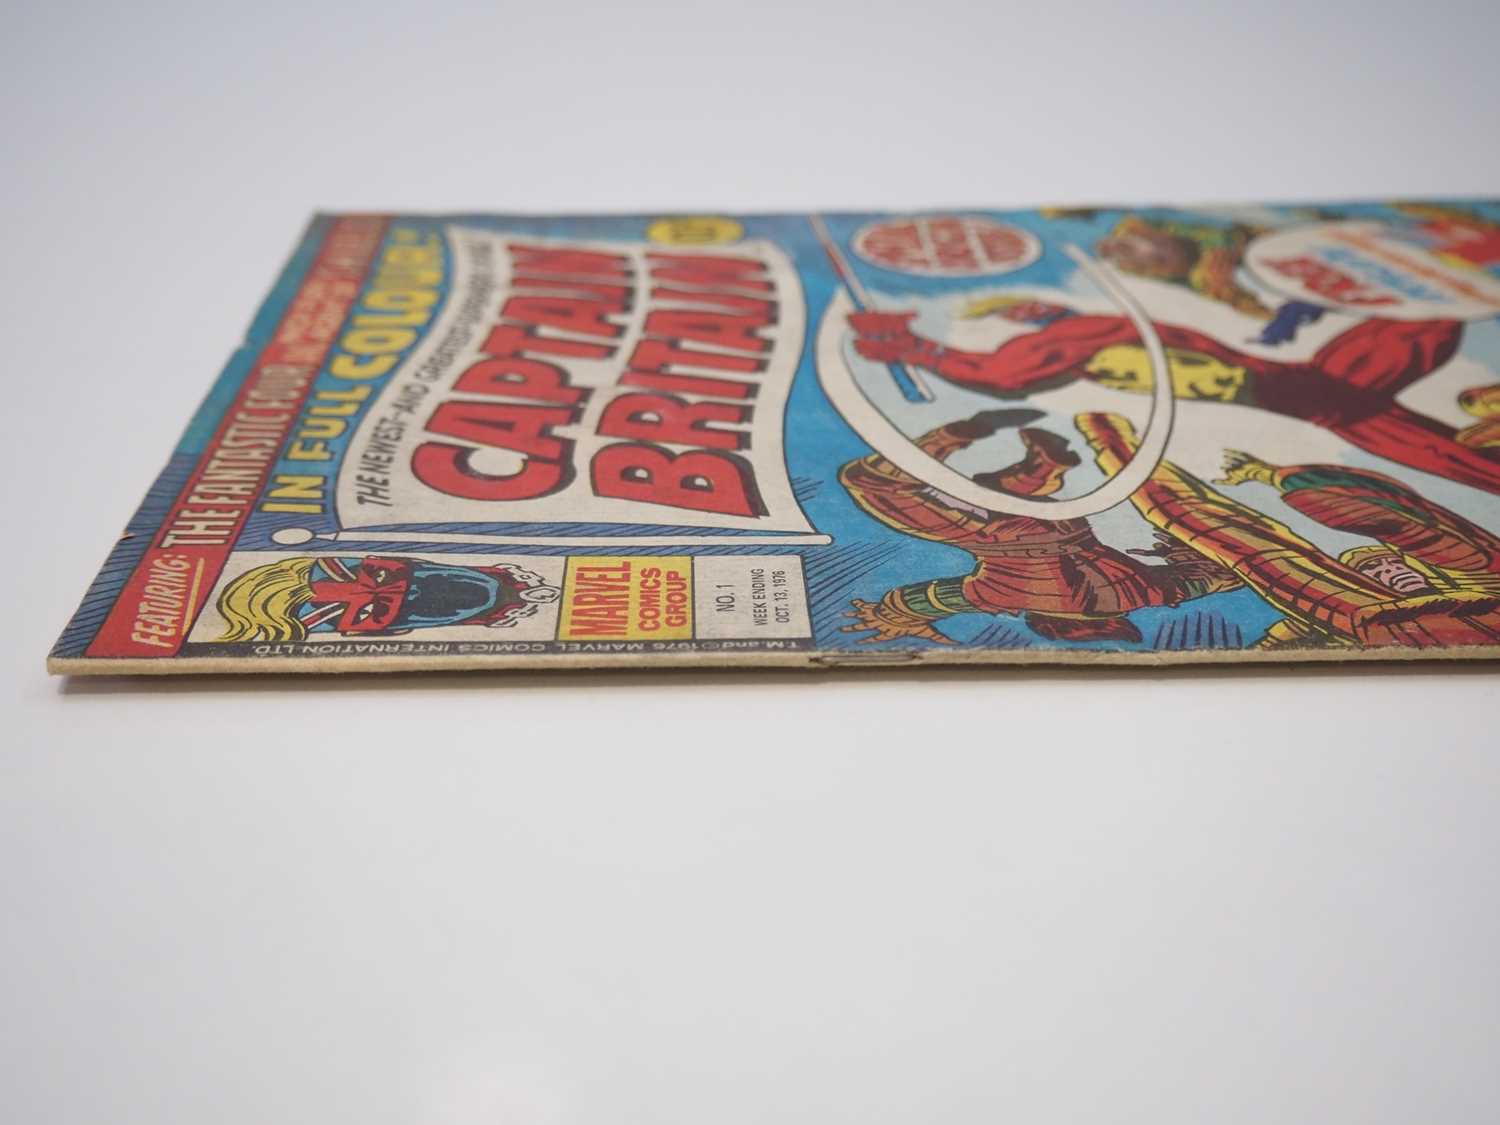 CAPTAIN BRITAIN #1 - (1976 - BRITISH MARVEL) - Origin and First appearance of Captain Britain - Image 7 of 8